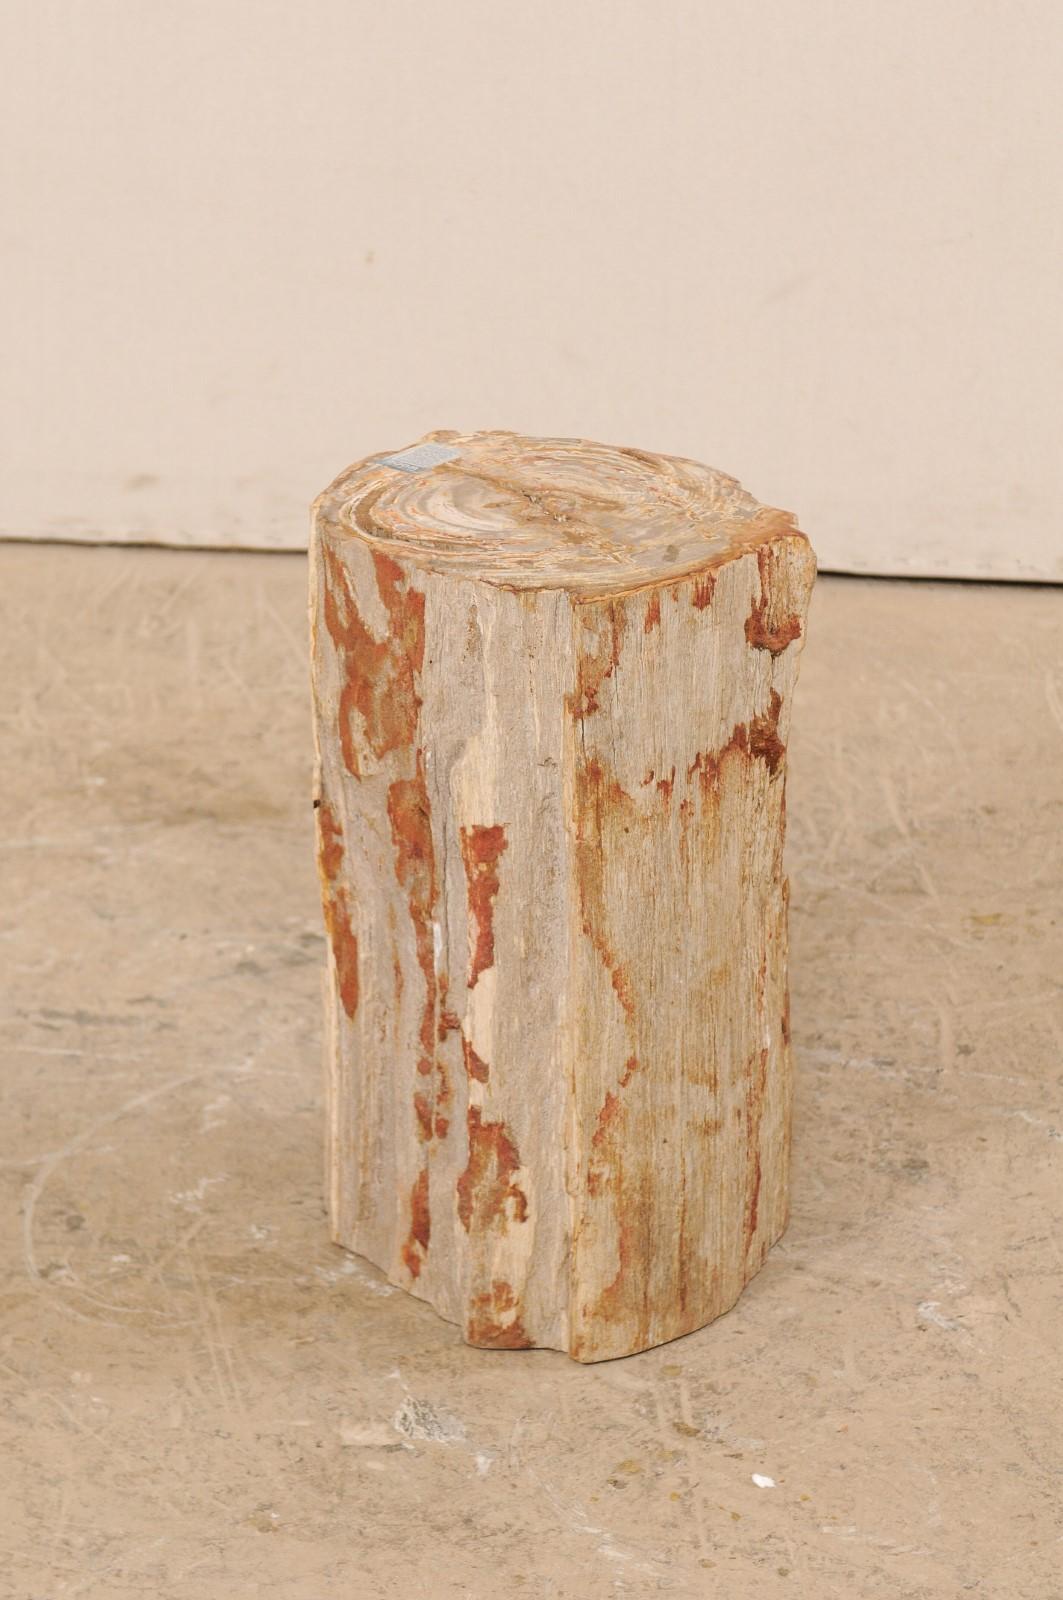 A single petrified wood drinks table (or stool). This petrified wood pedestal table has a smoothly polished top and natural, live-edge sides. The color palette is a beautiful mixture of rusty/browns, beige, and taupe. Petrified wood is a fossil,